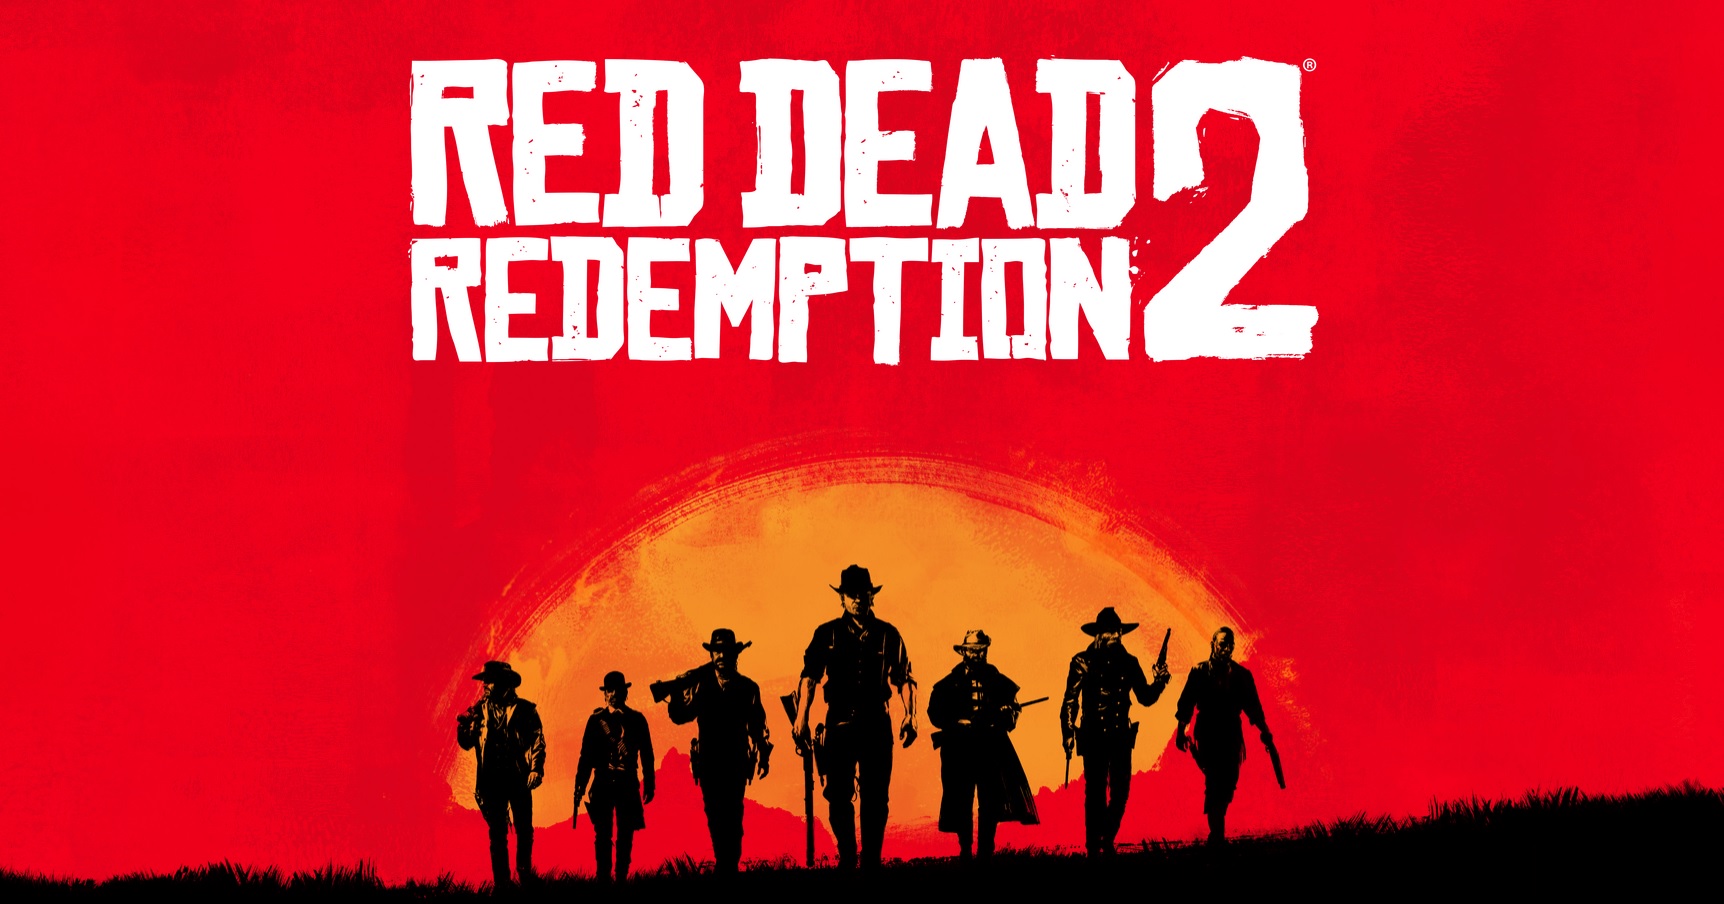 Red_Dead_Redemption_2-feature_nivelul2